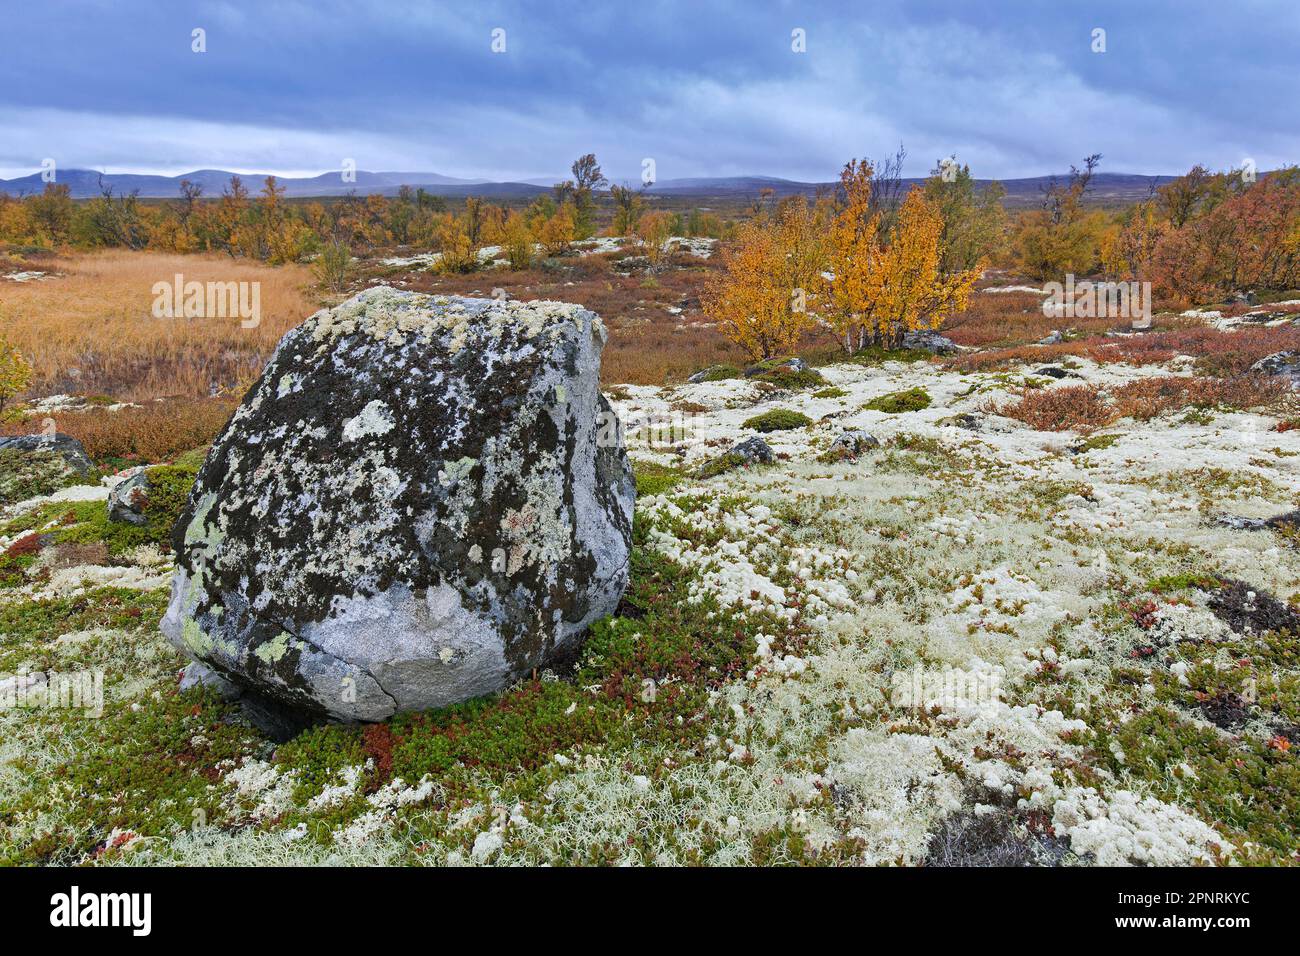 Moorland with birch trees and boulder covered in lichens in the Fokstumyra Nature Reserve in autumn / falll, Dovrefjell, Oppdal, Dovre, Central Norway Stock Photo